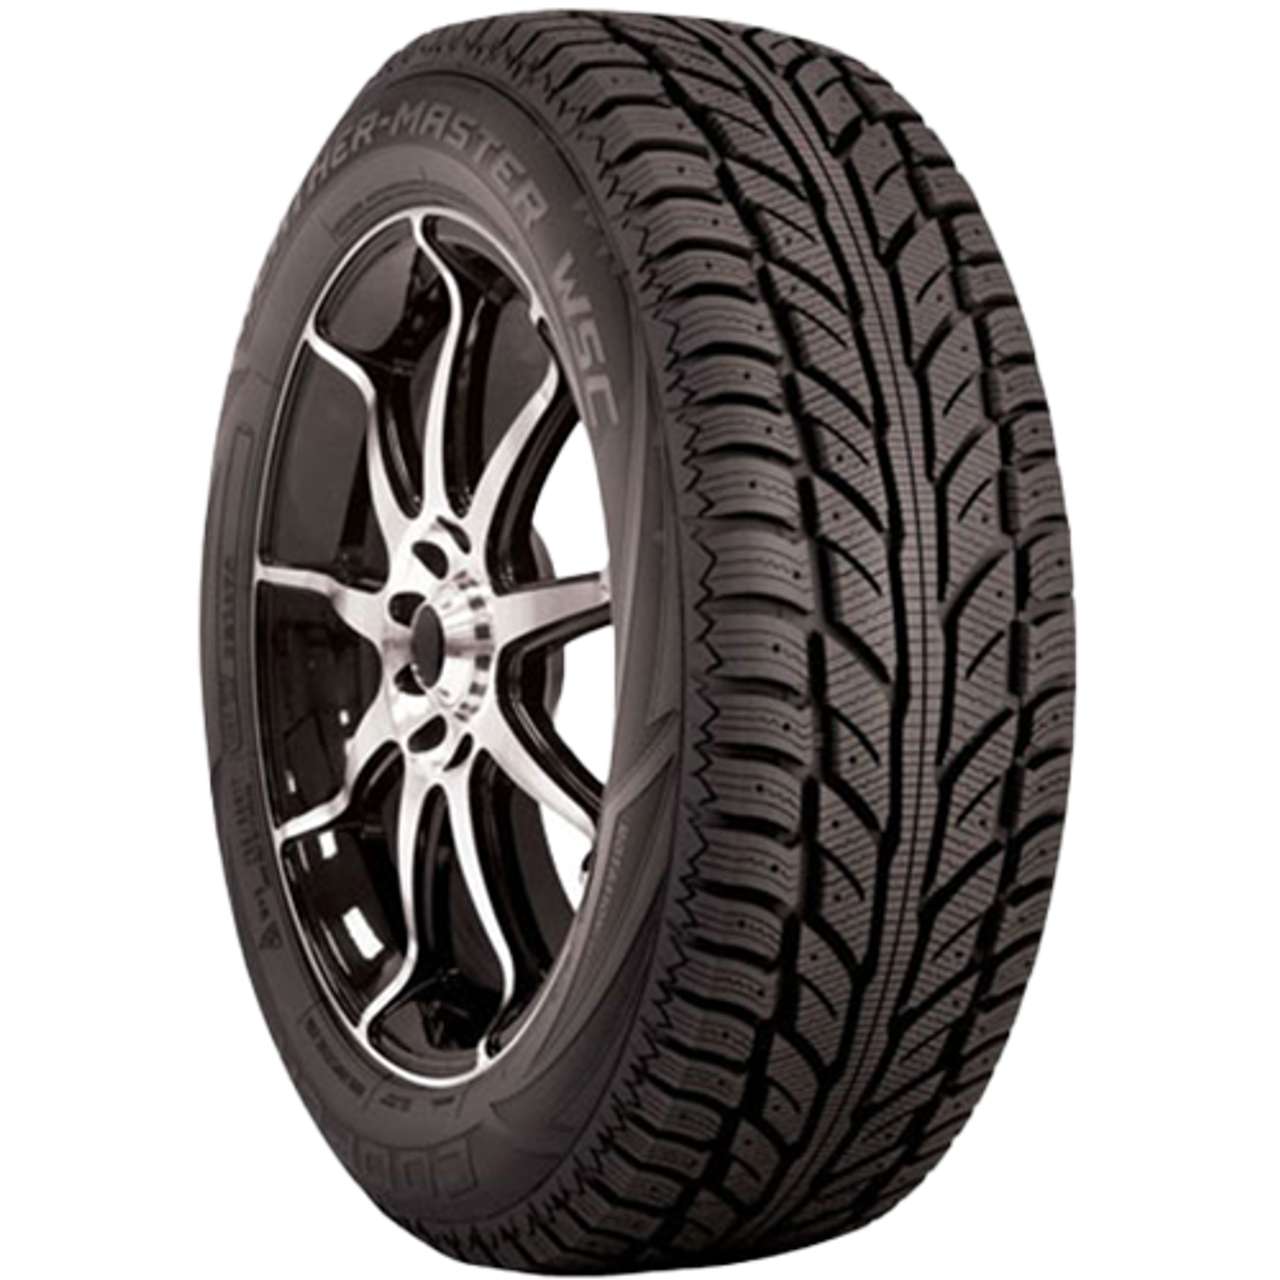 COOPER WEATHERMASTER WSC 225/55R18 98T STUDDABLE BSW